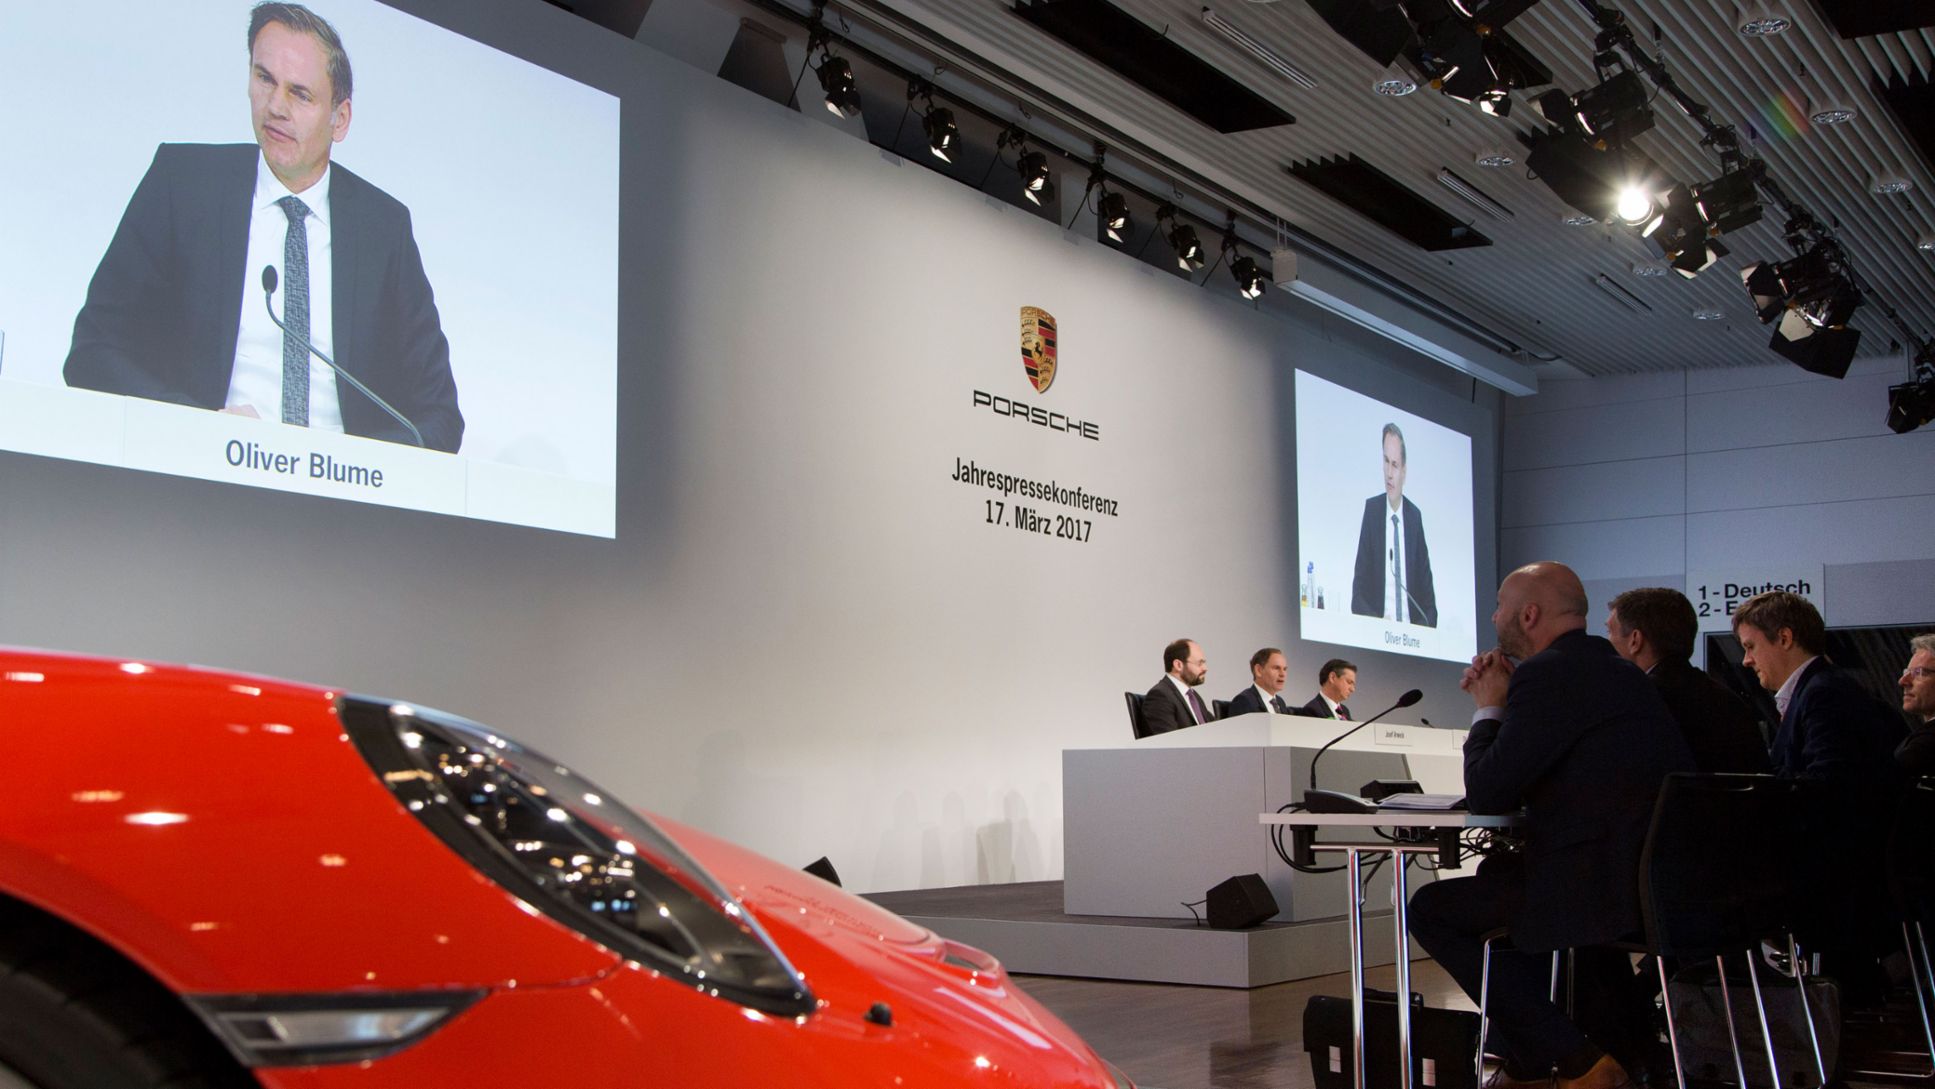 Josef Arweck, Vice President Communications, Oliver Blume, Chairman of the Executive Board, Lutz Meschke, Deputy Chairman of the Executive Board and Member of the Executive Board for Finance and IT, l-r, annual press conference, Stuttgart, 2017, Porsche AG